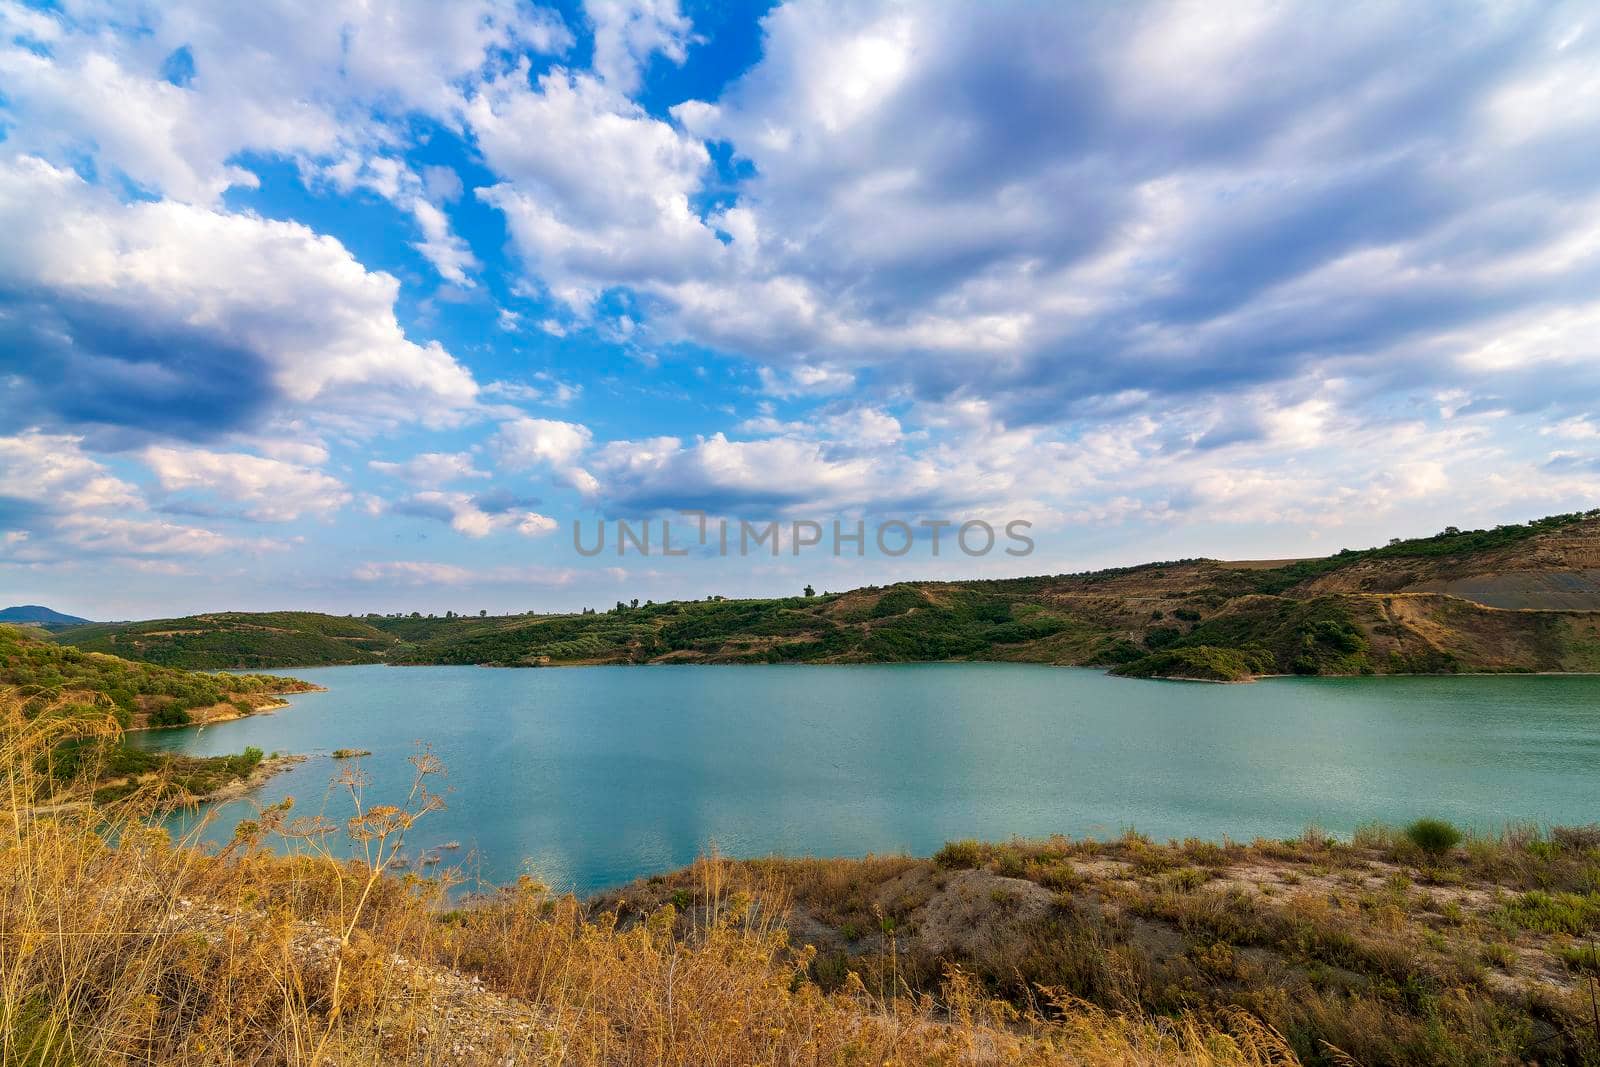 Christianoupolis dam water reservoir in Messenia, Greece. View of the dam, artificial lake. by ankarb